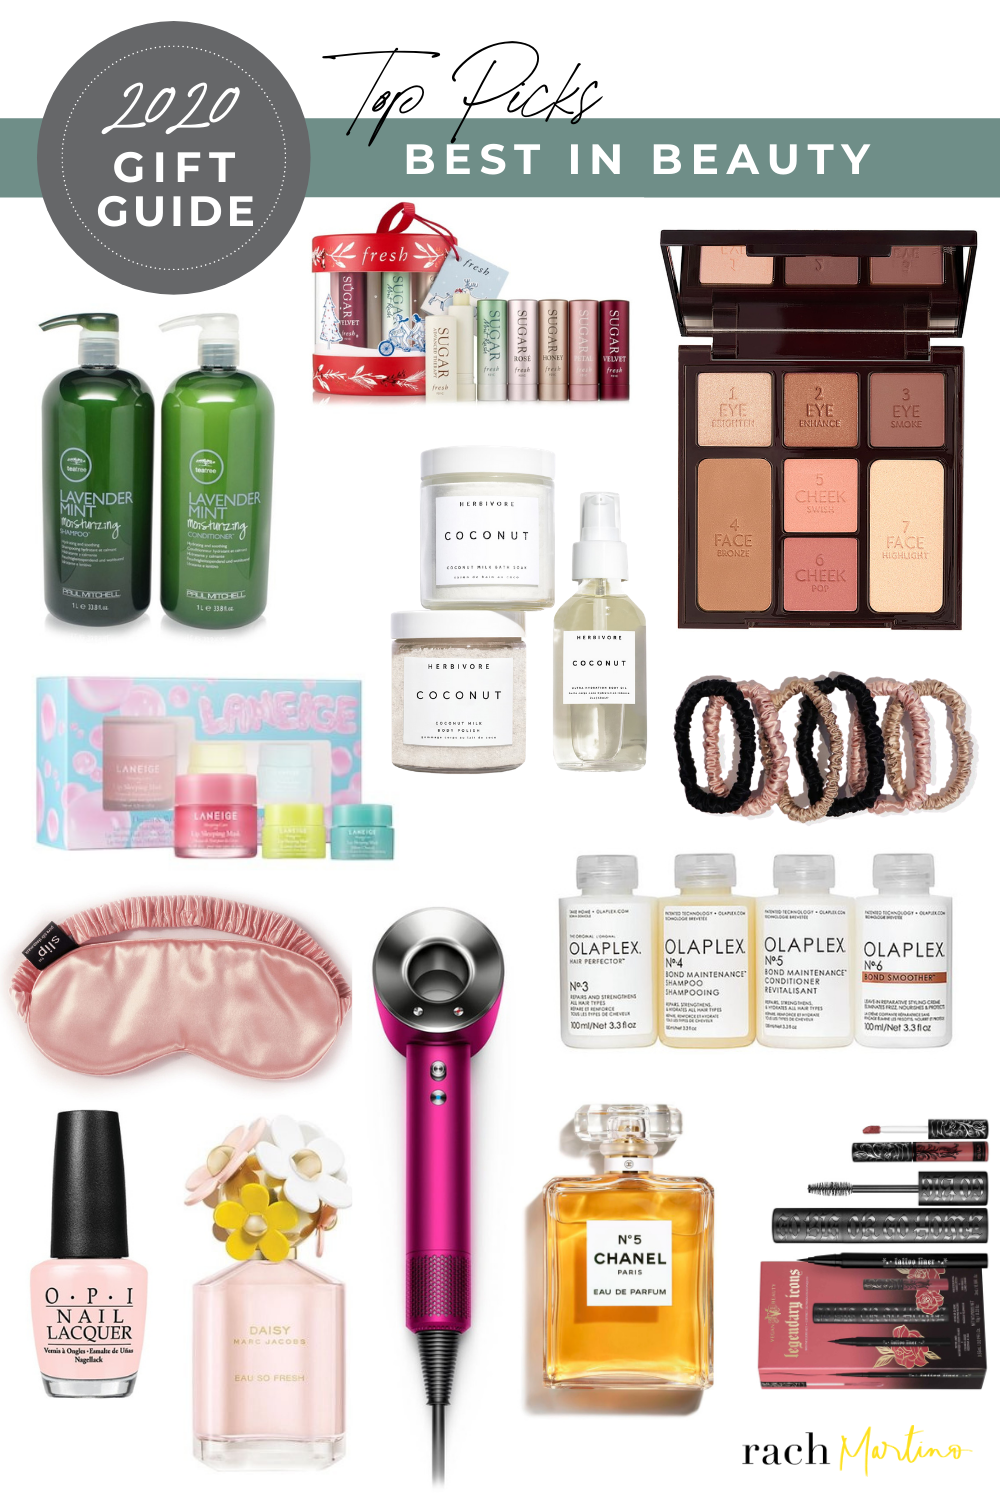 2020 Gift Guide for the Beauty Lover